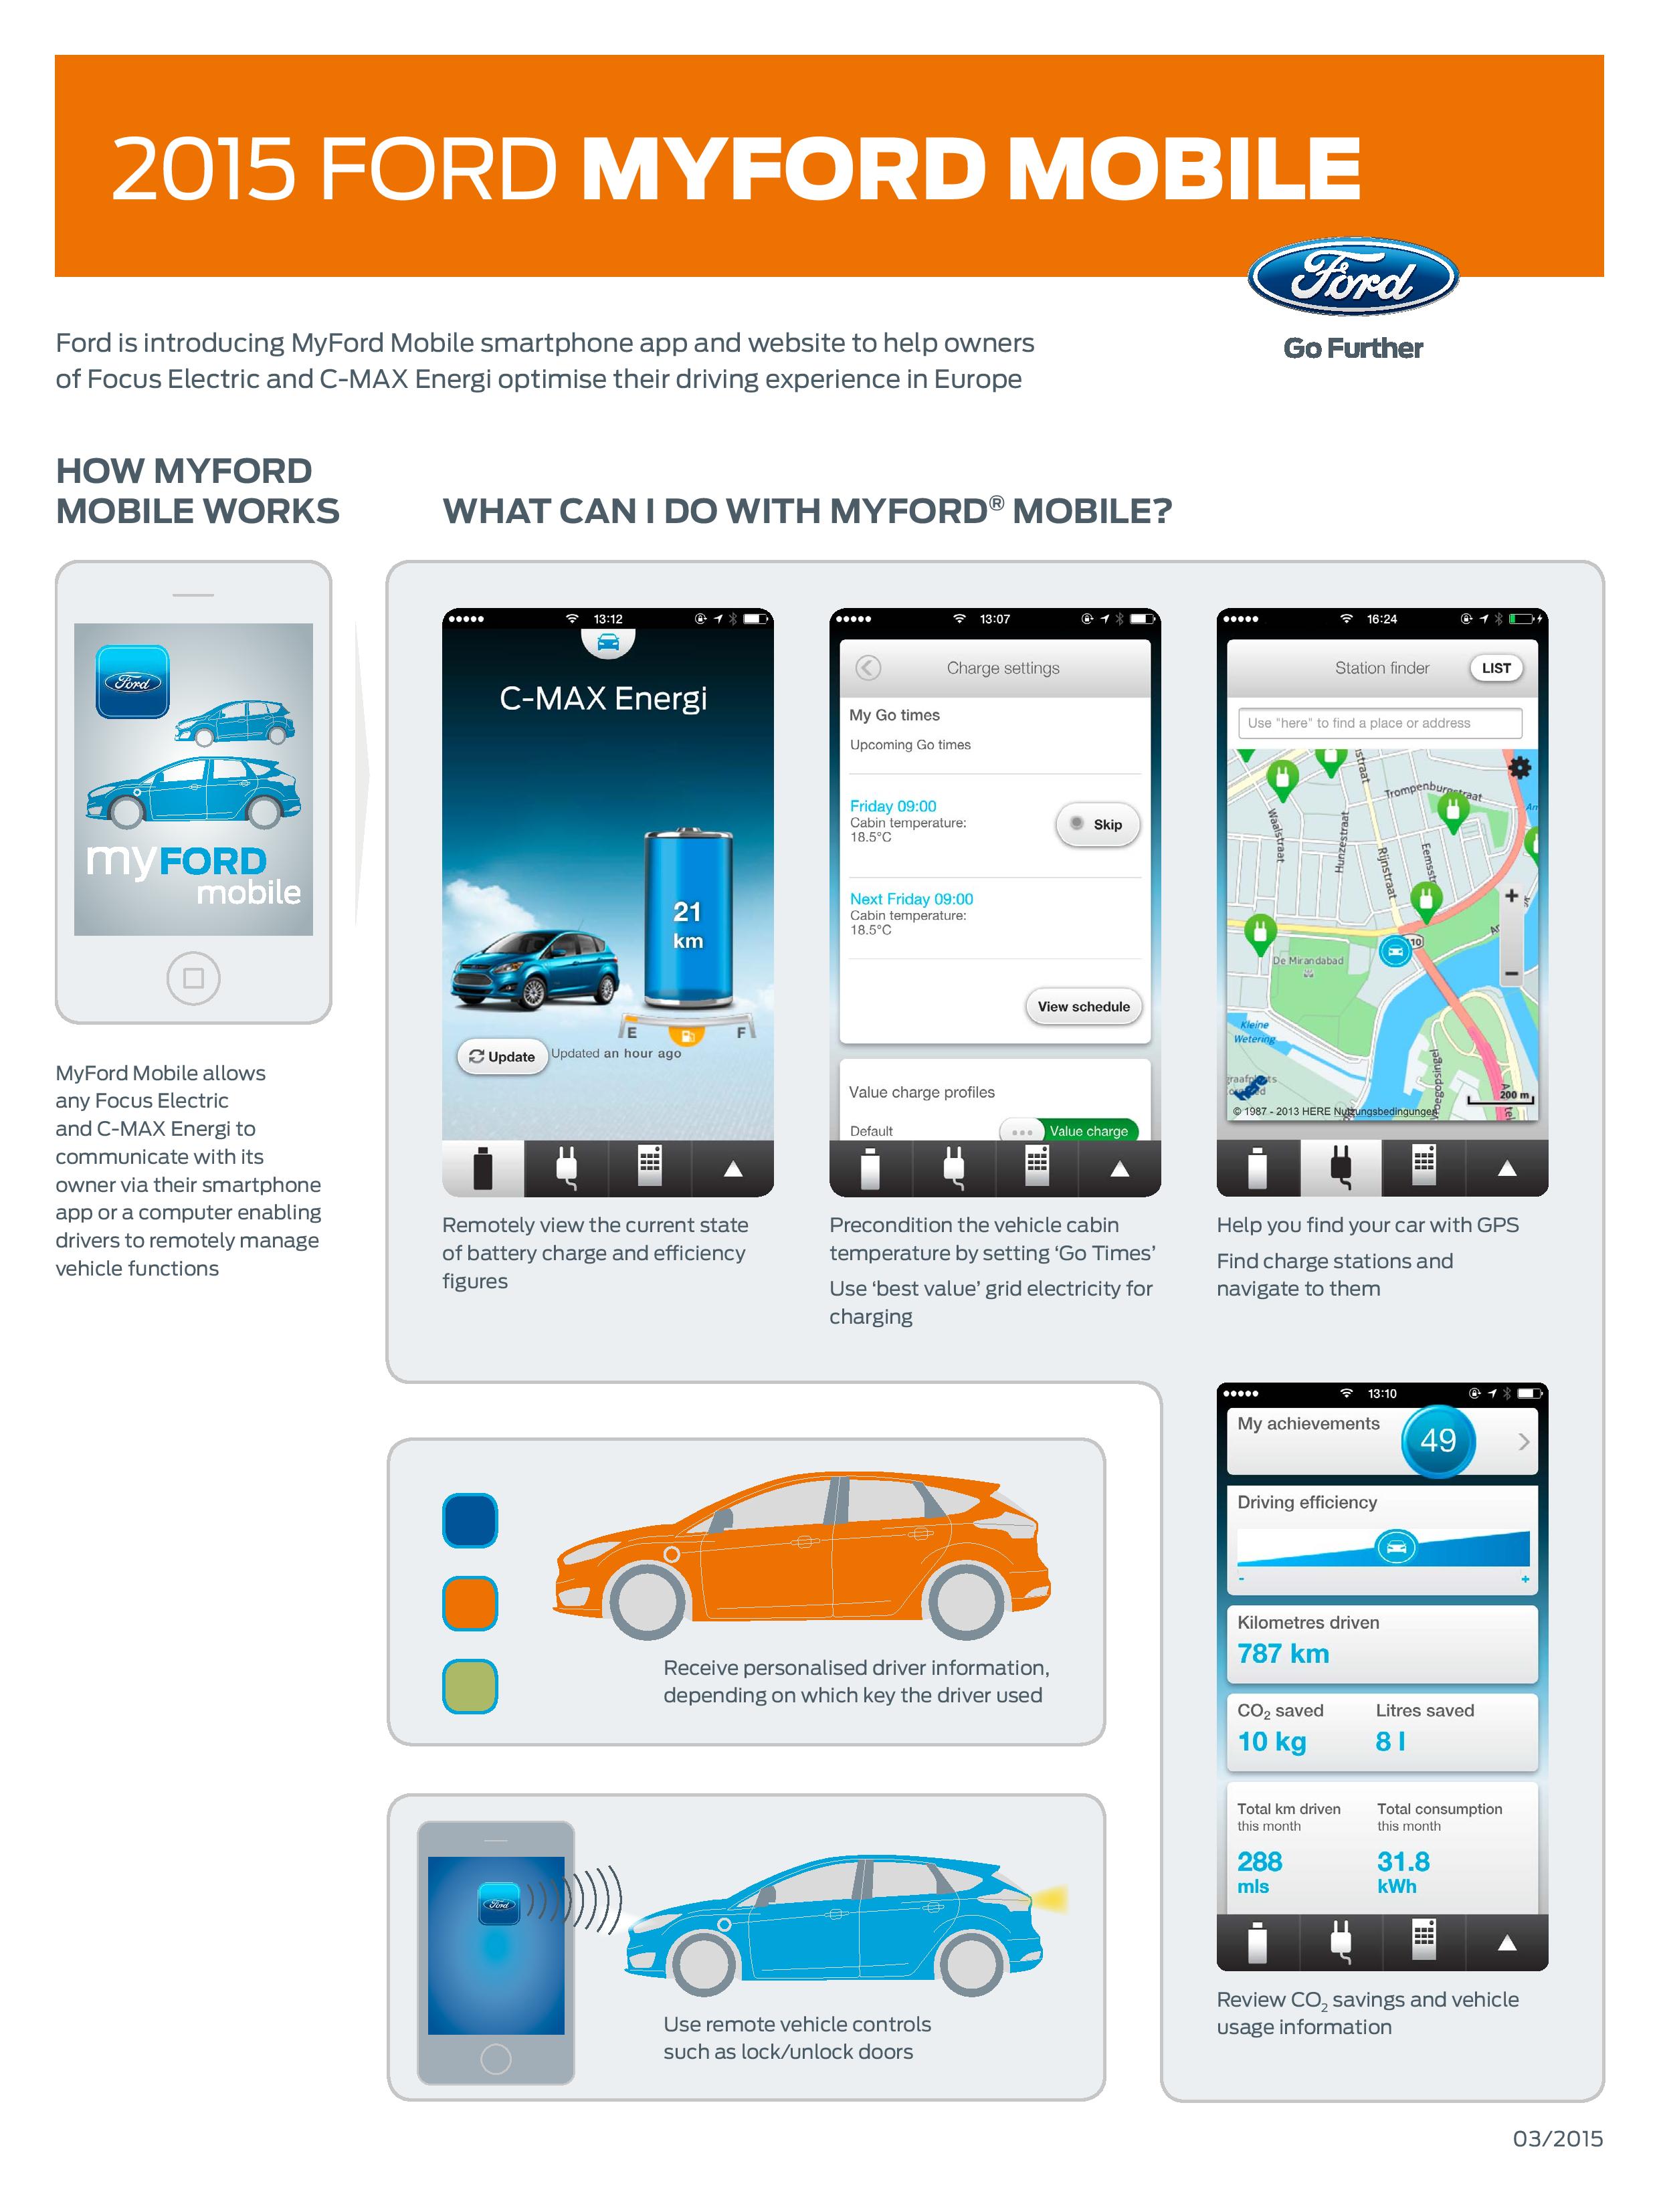 Ford Smart Mobility LLC. Allow mobile